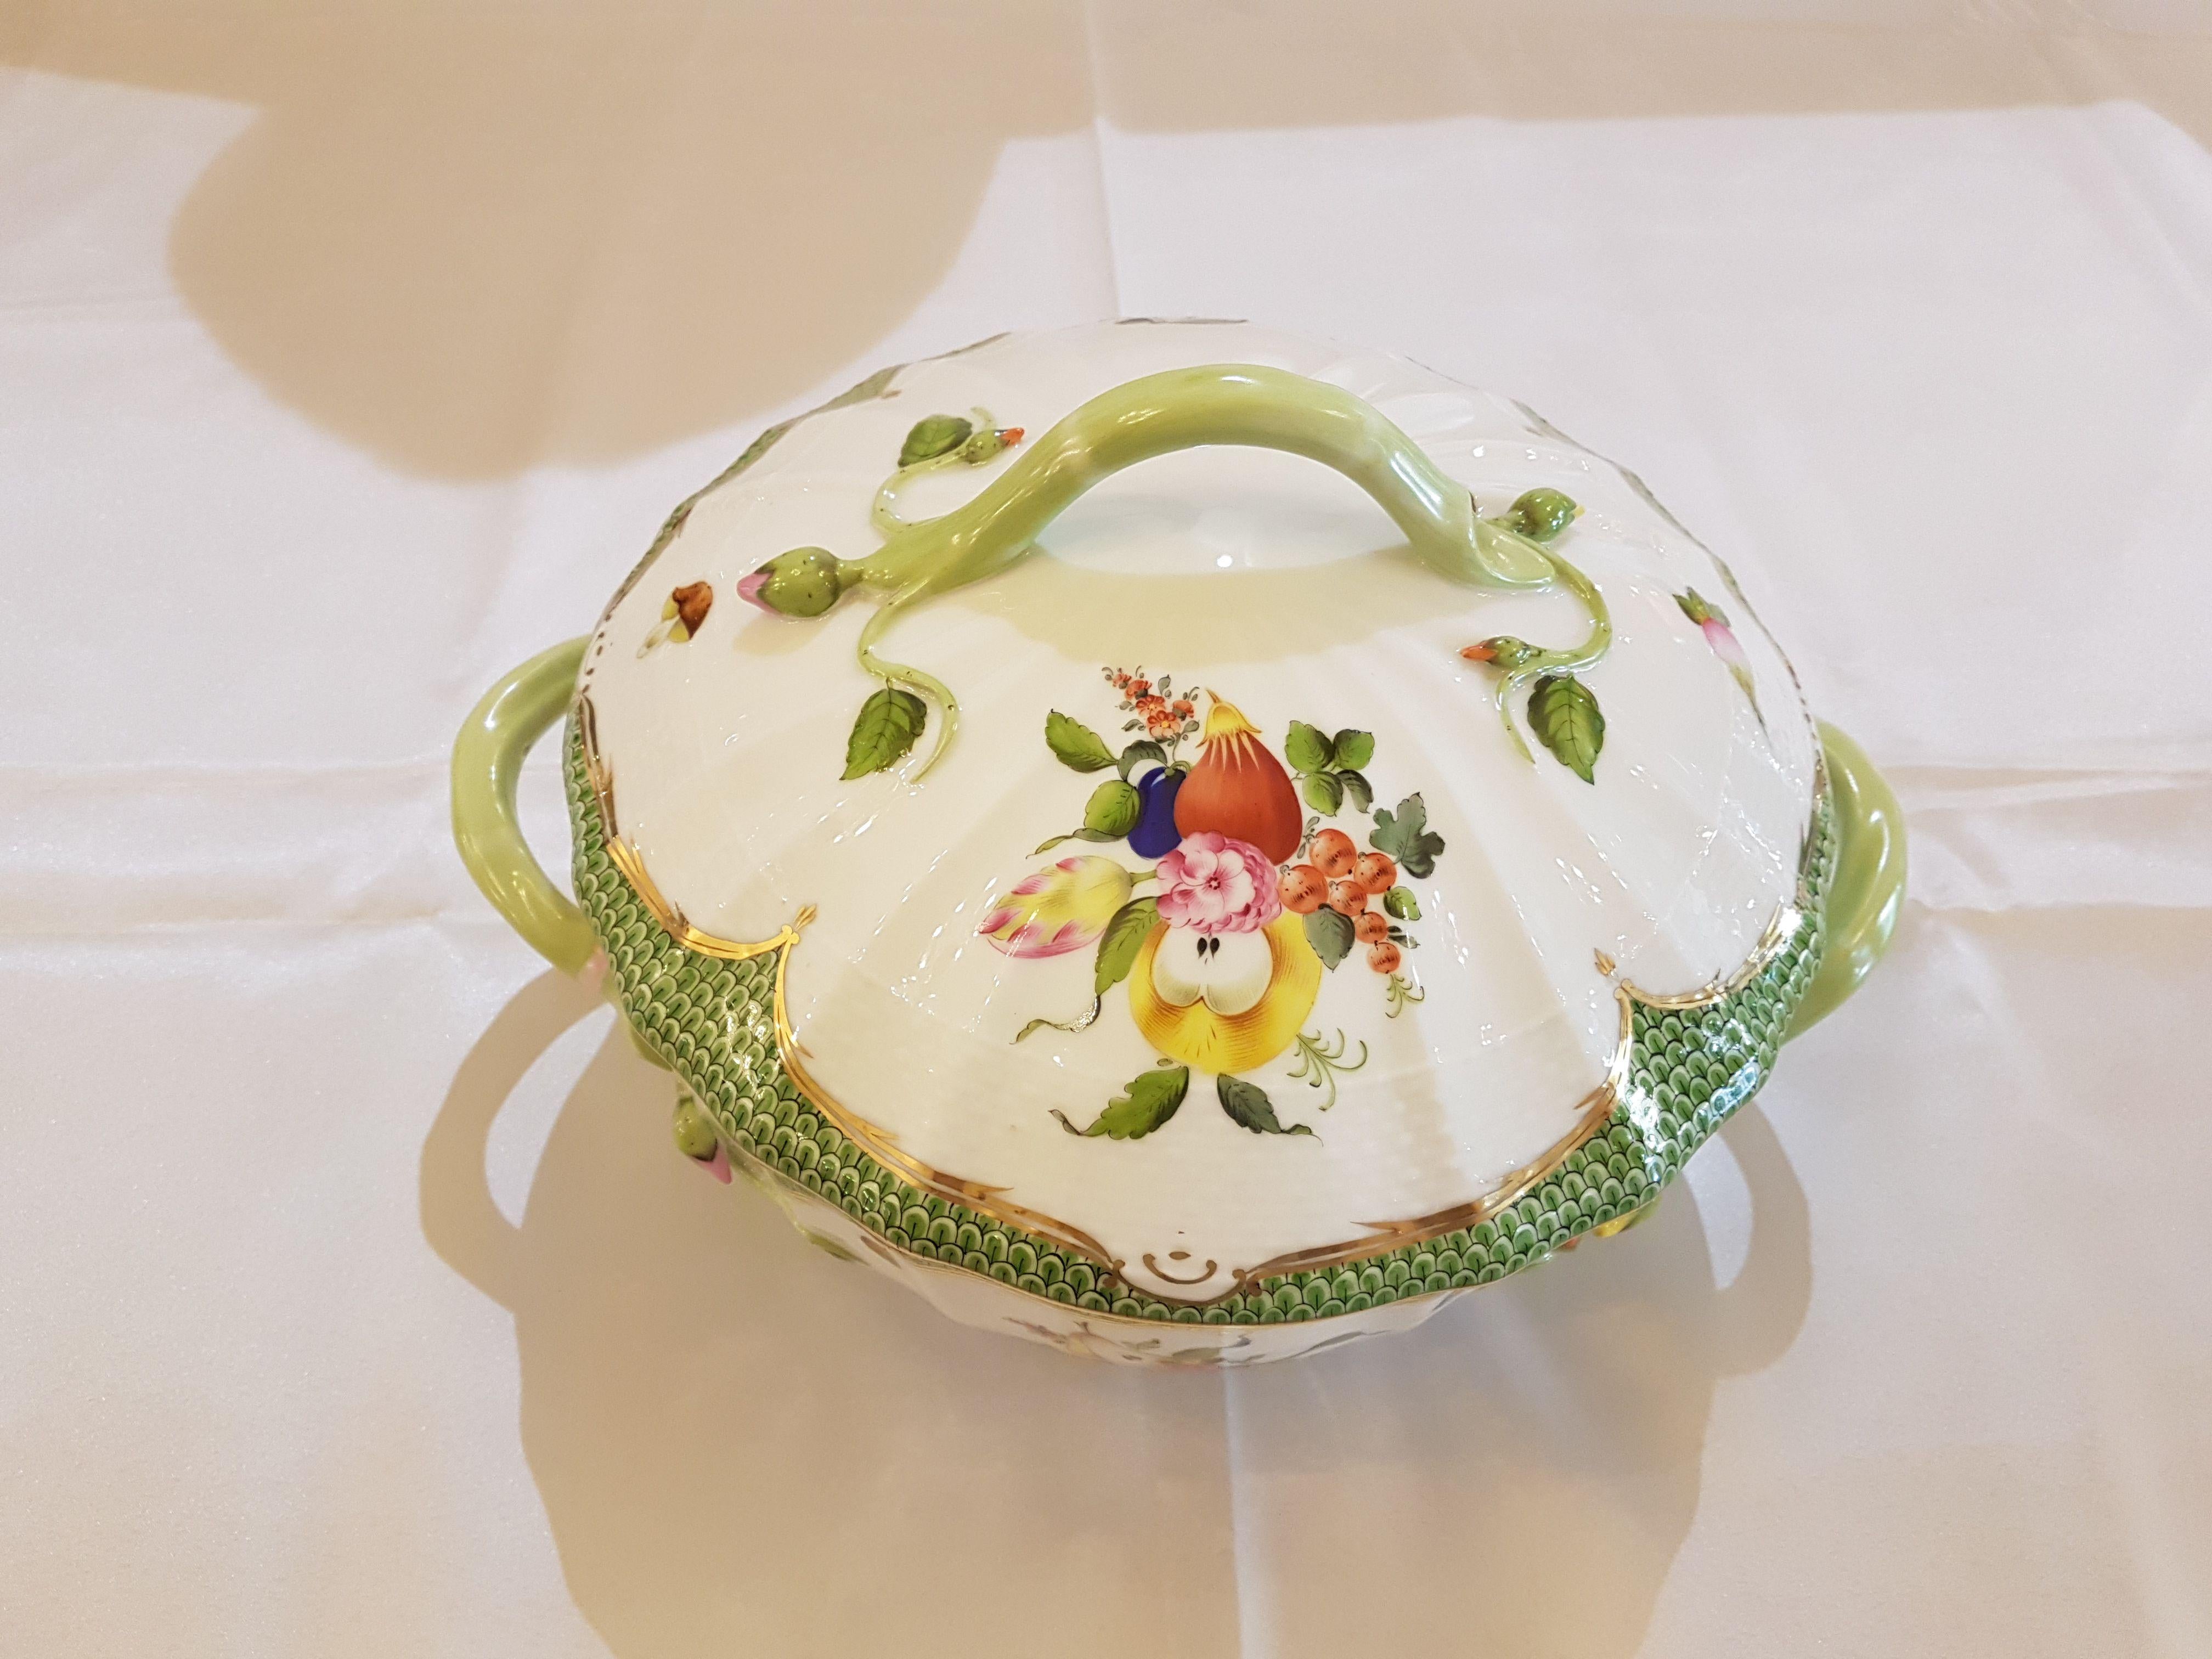 Interesting, colorful pair of hand-painted Hungarian porcelain tureen by Herend.
